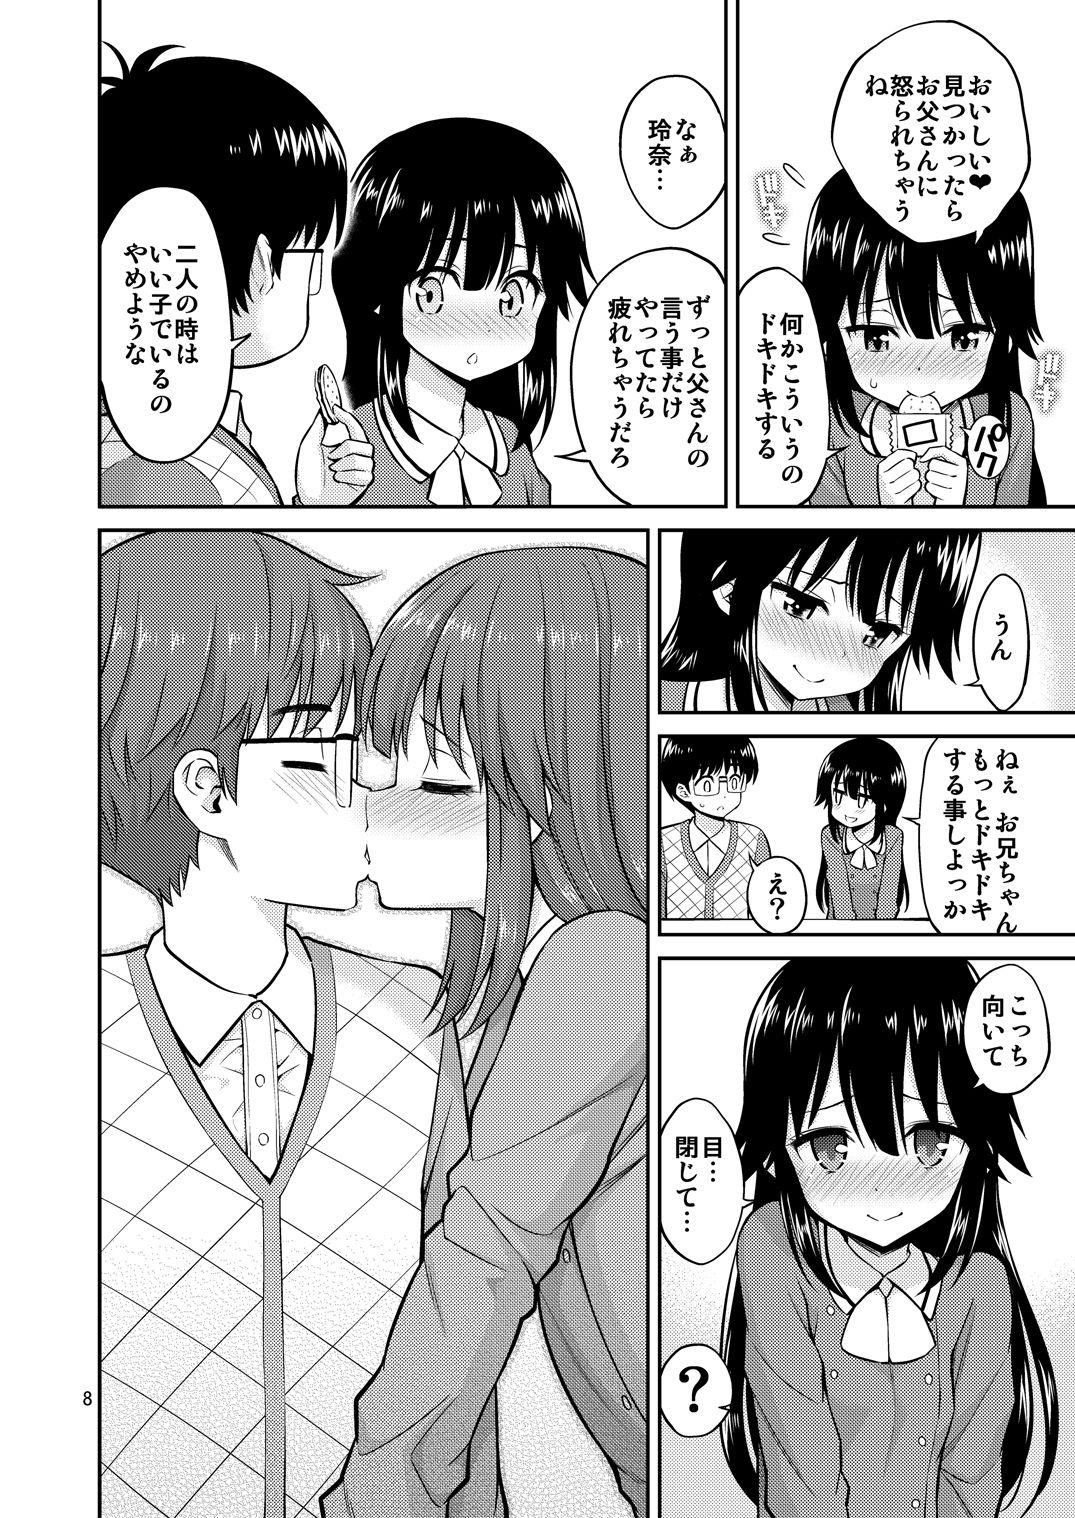 Ink Imouto to Uchi Kiss Publico - Page 8